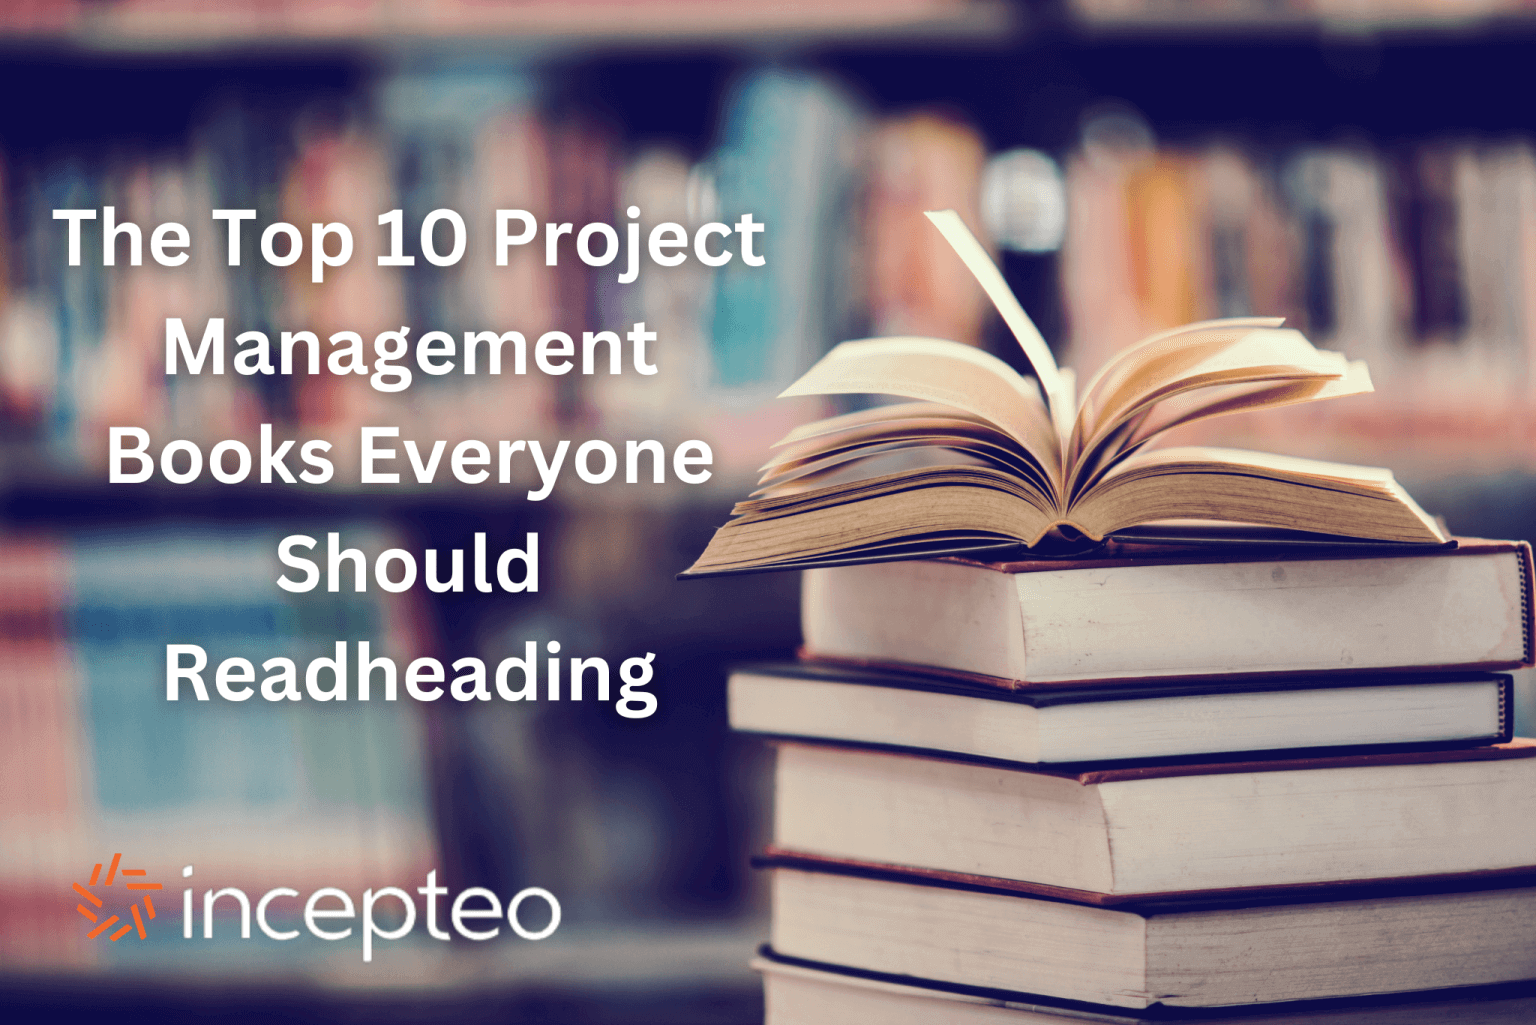 Top 10 Project Management Books Everyone Should Read